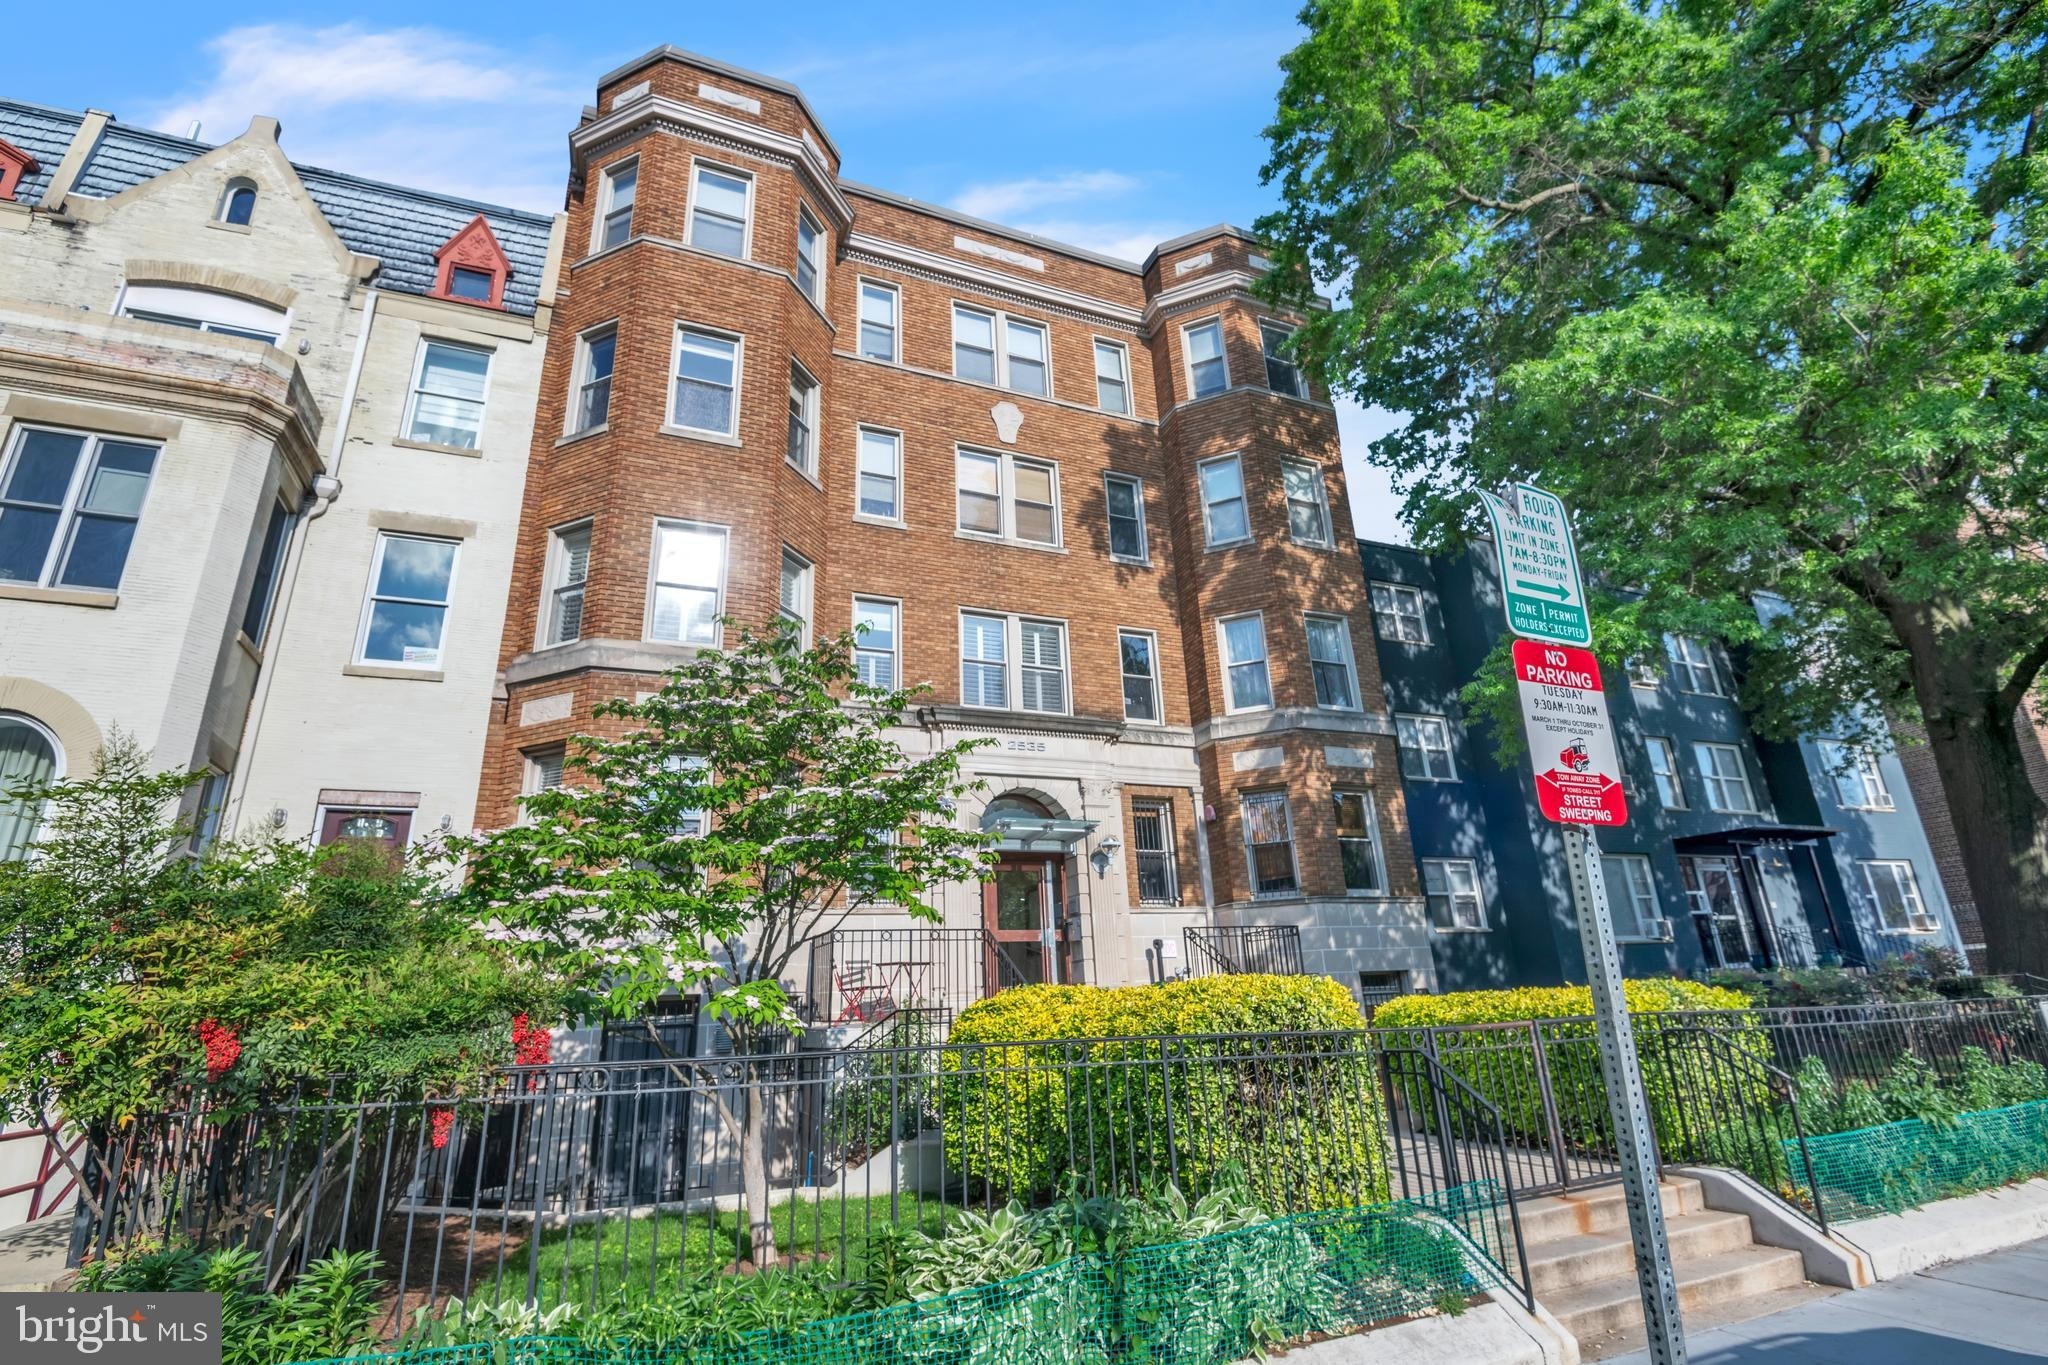 26. 2535 13th Street NW